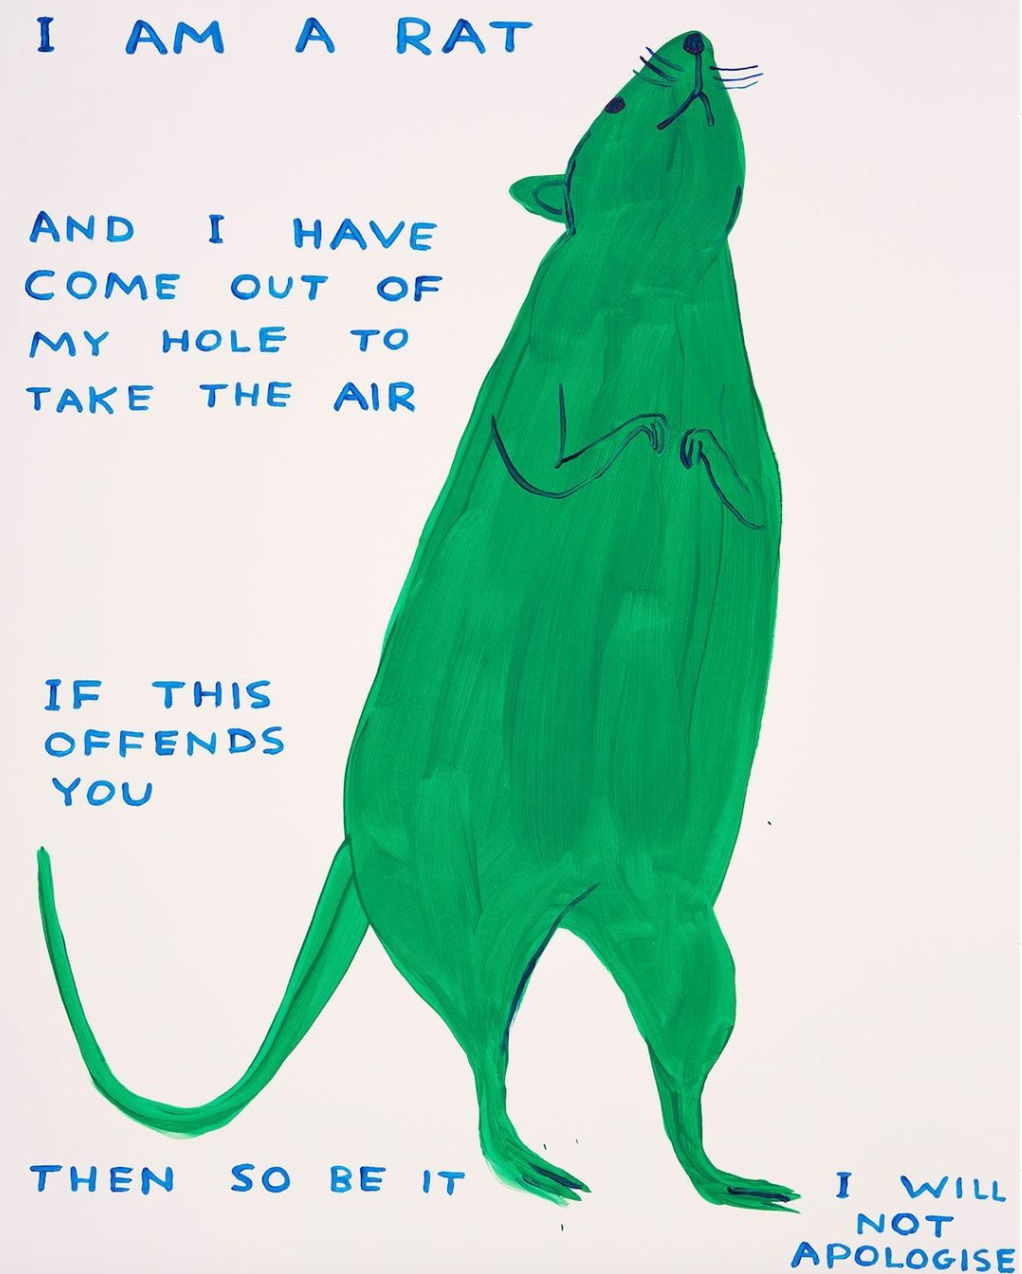 Drawing of a green rat standing on its hind legs, with text next to it that reads, "I am a rat and I have come out of my hole to take the air If this offends you then so be it I will not apologize"